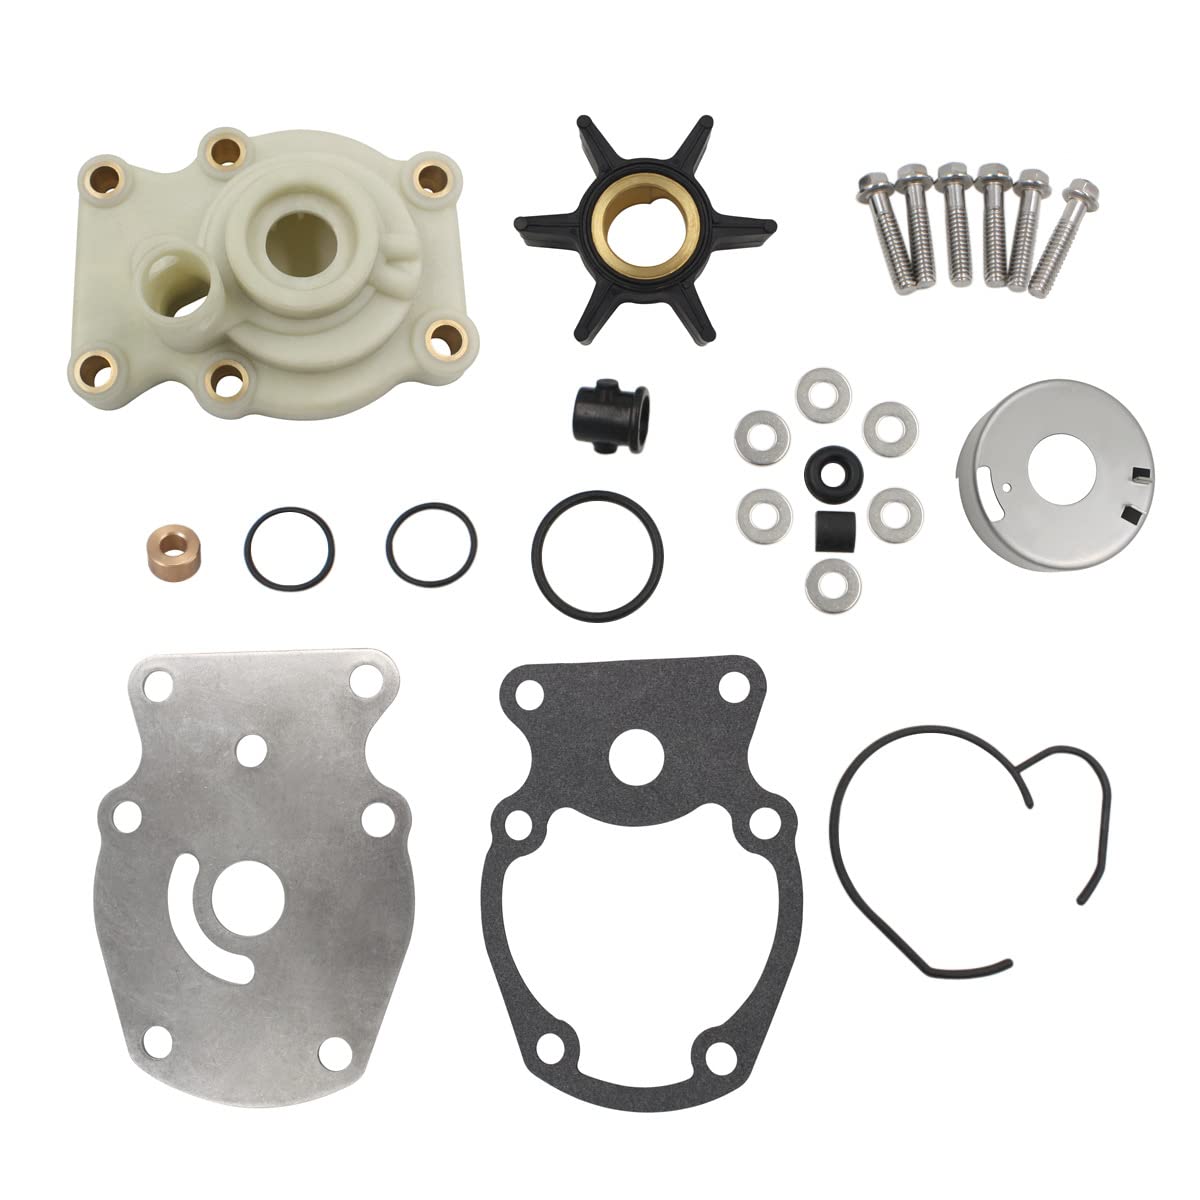 UanofCn 393630 Water Pump Impeller kit Replaces Johnson Evinrude OMC 20 25 30 35 HP Outboard Motors Sierra 18-3382